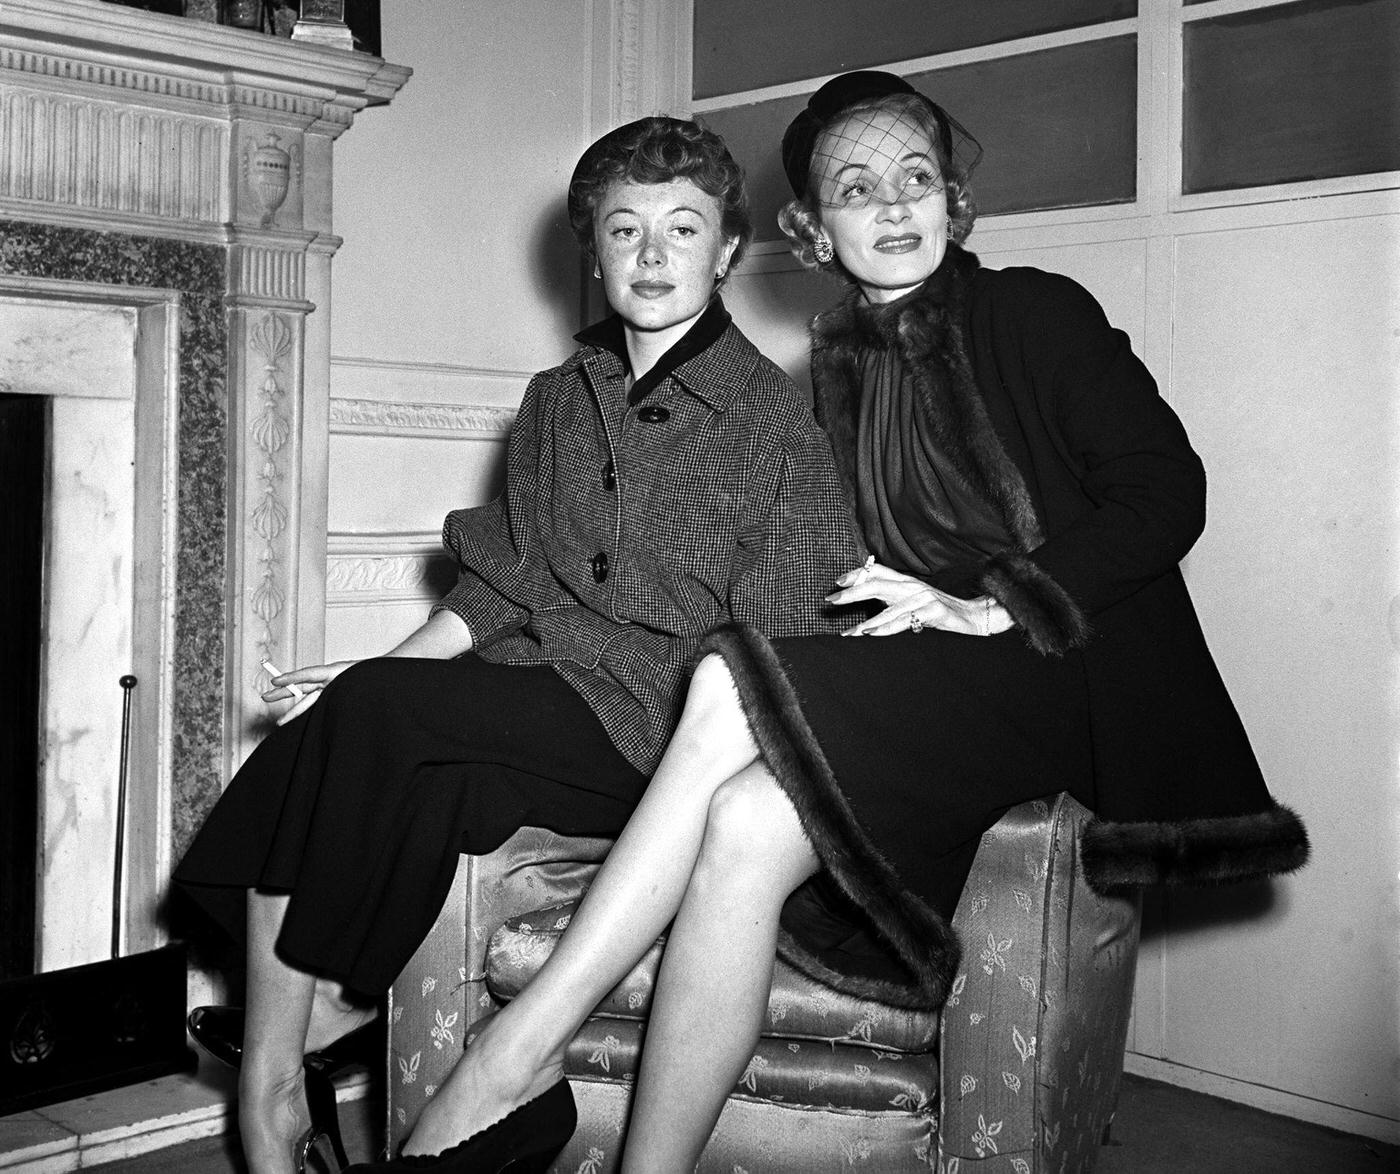 Glynis Johns is pictured with Marlene Dietrich.